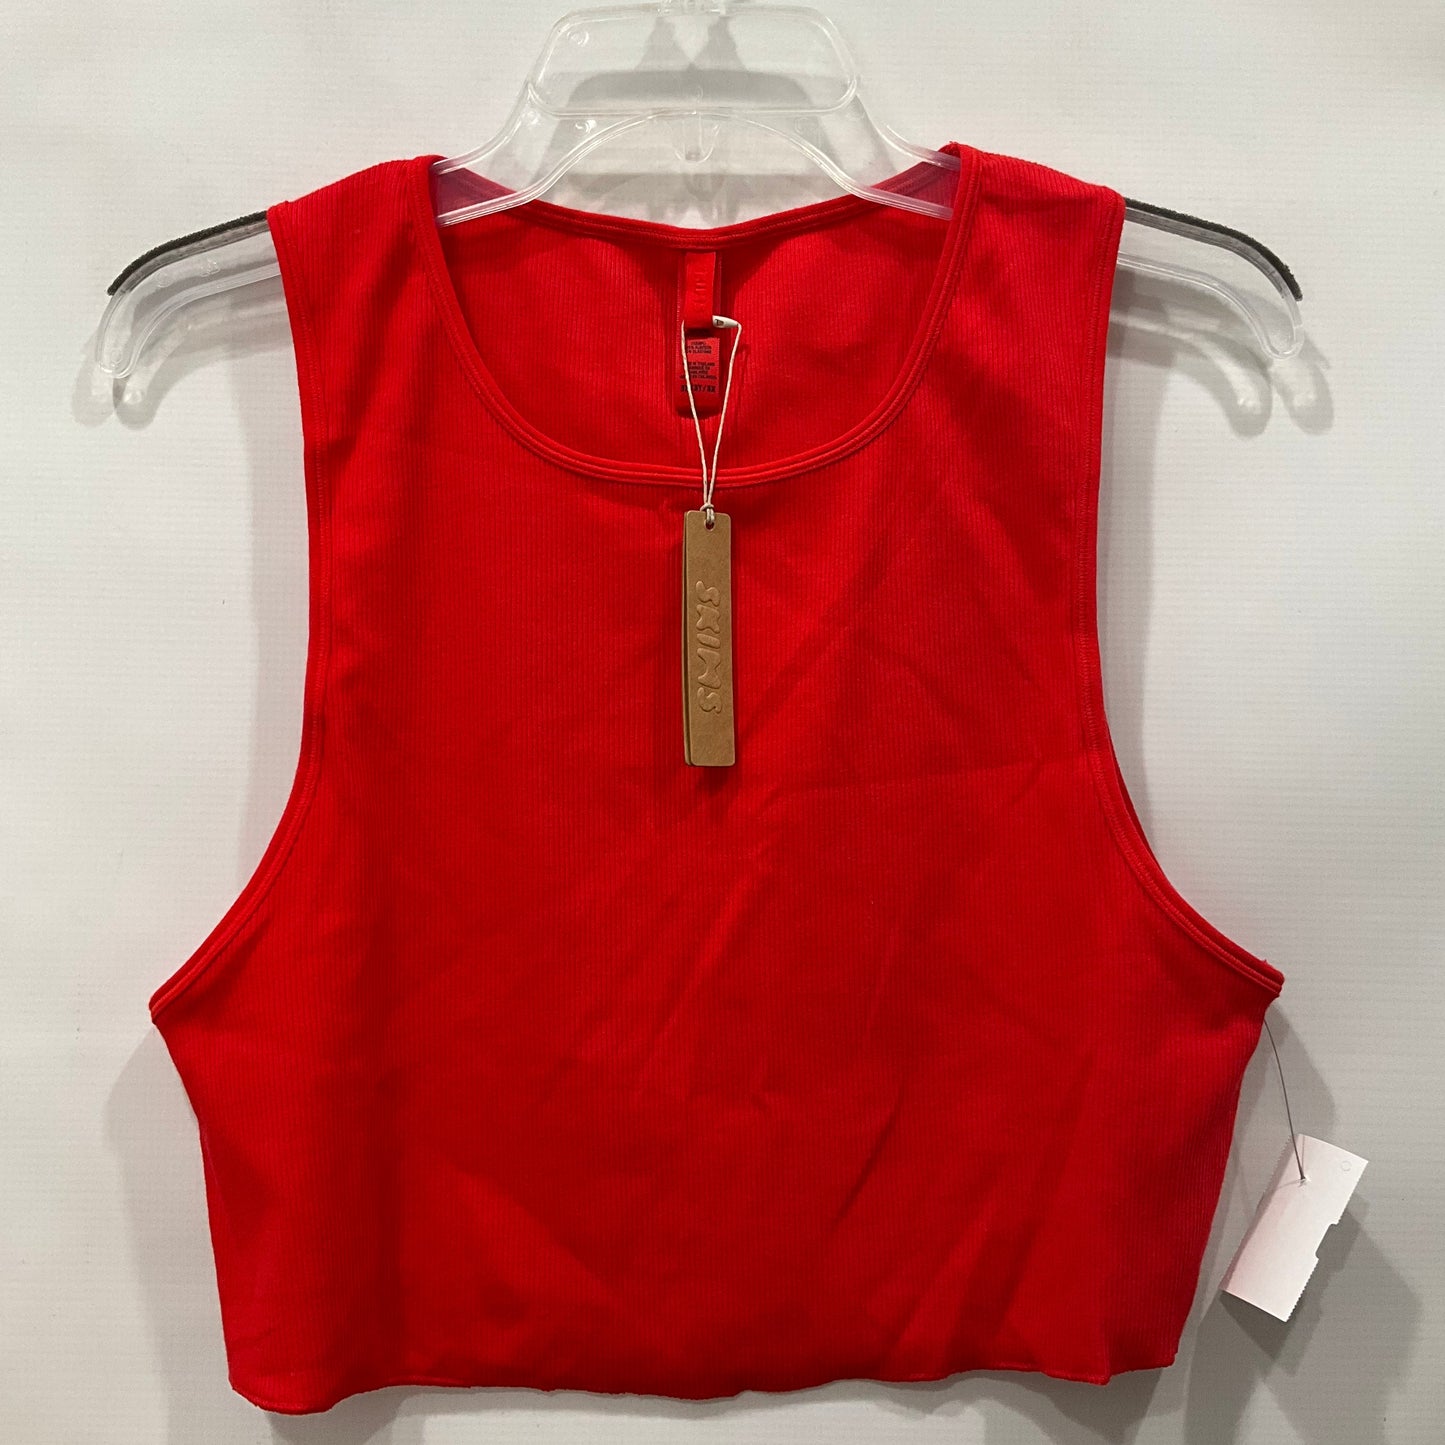 Red Top Sleeveless Skims, Size 3x